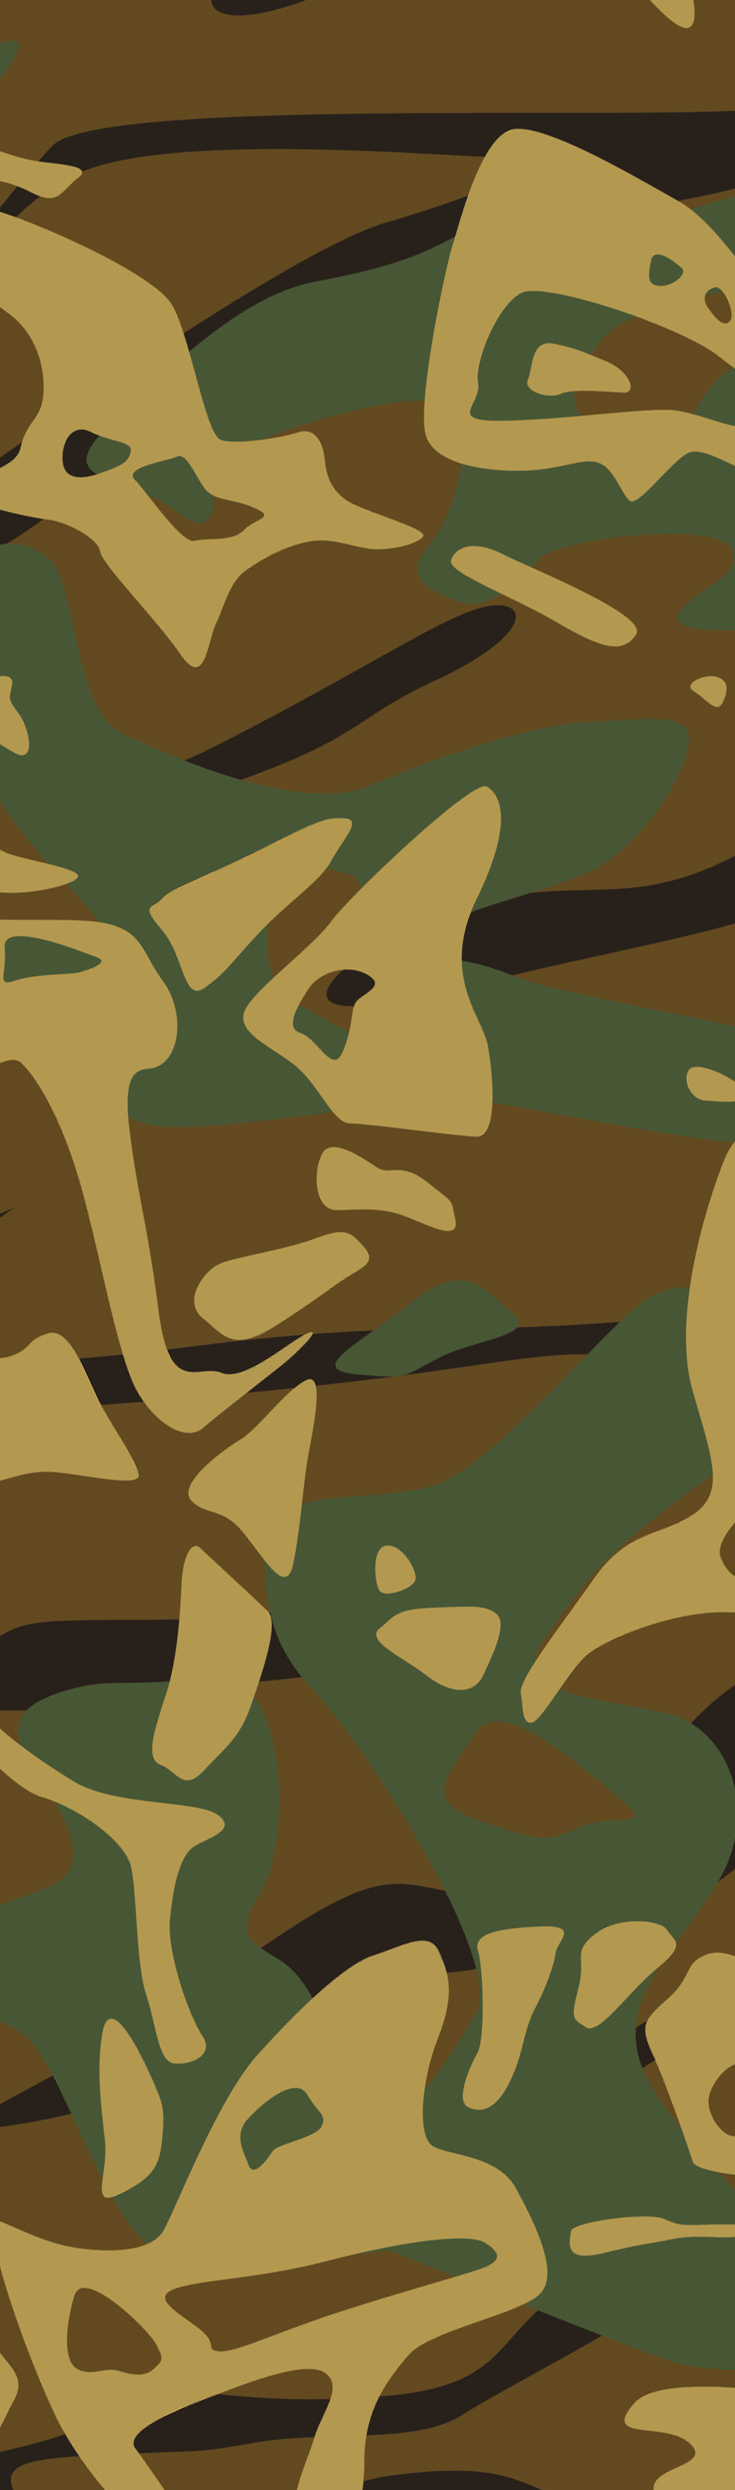 Army Texture Vector at Vectorified.com | Collection of Army Texture ...